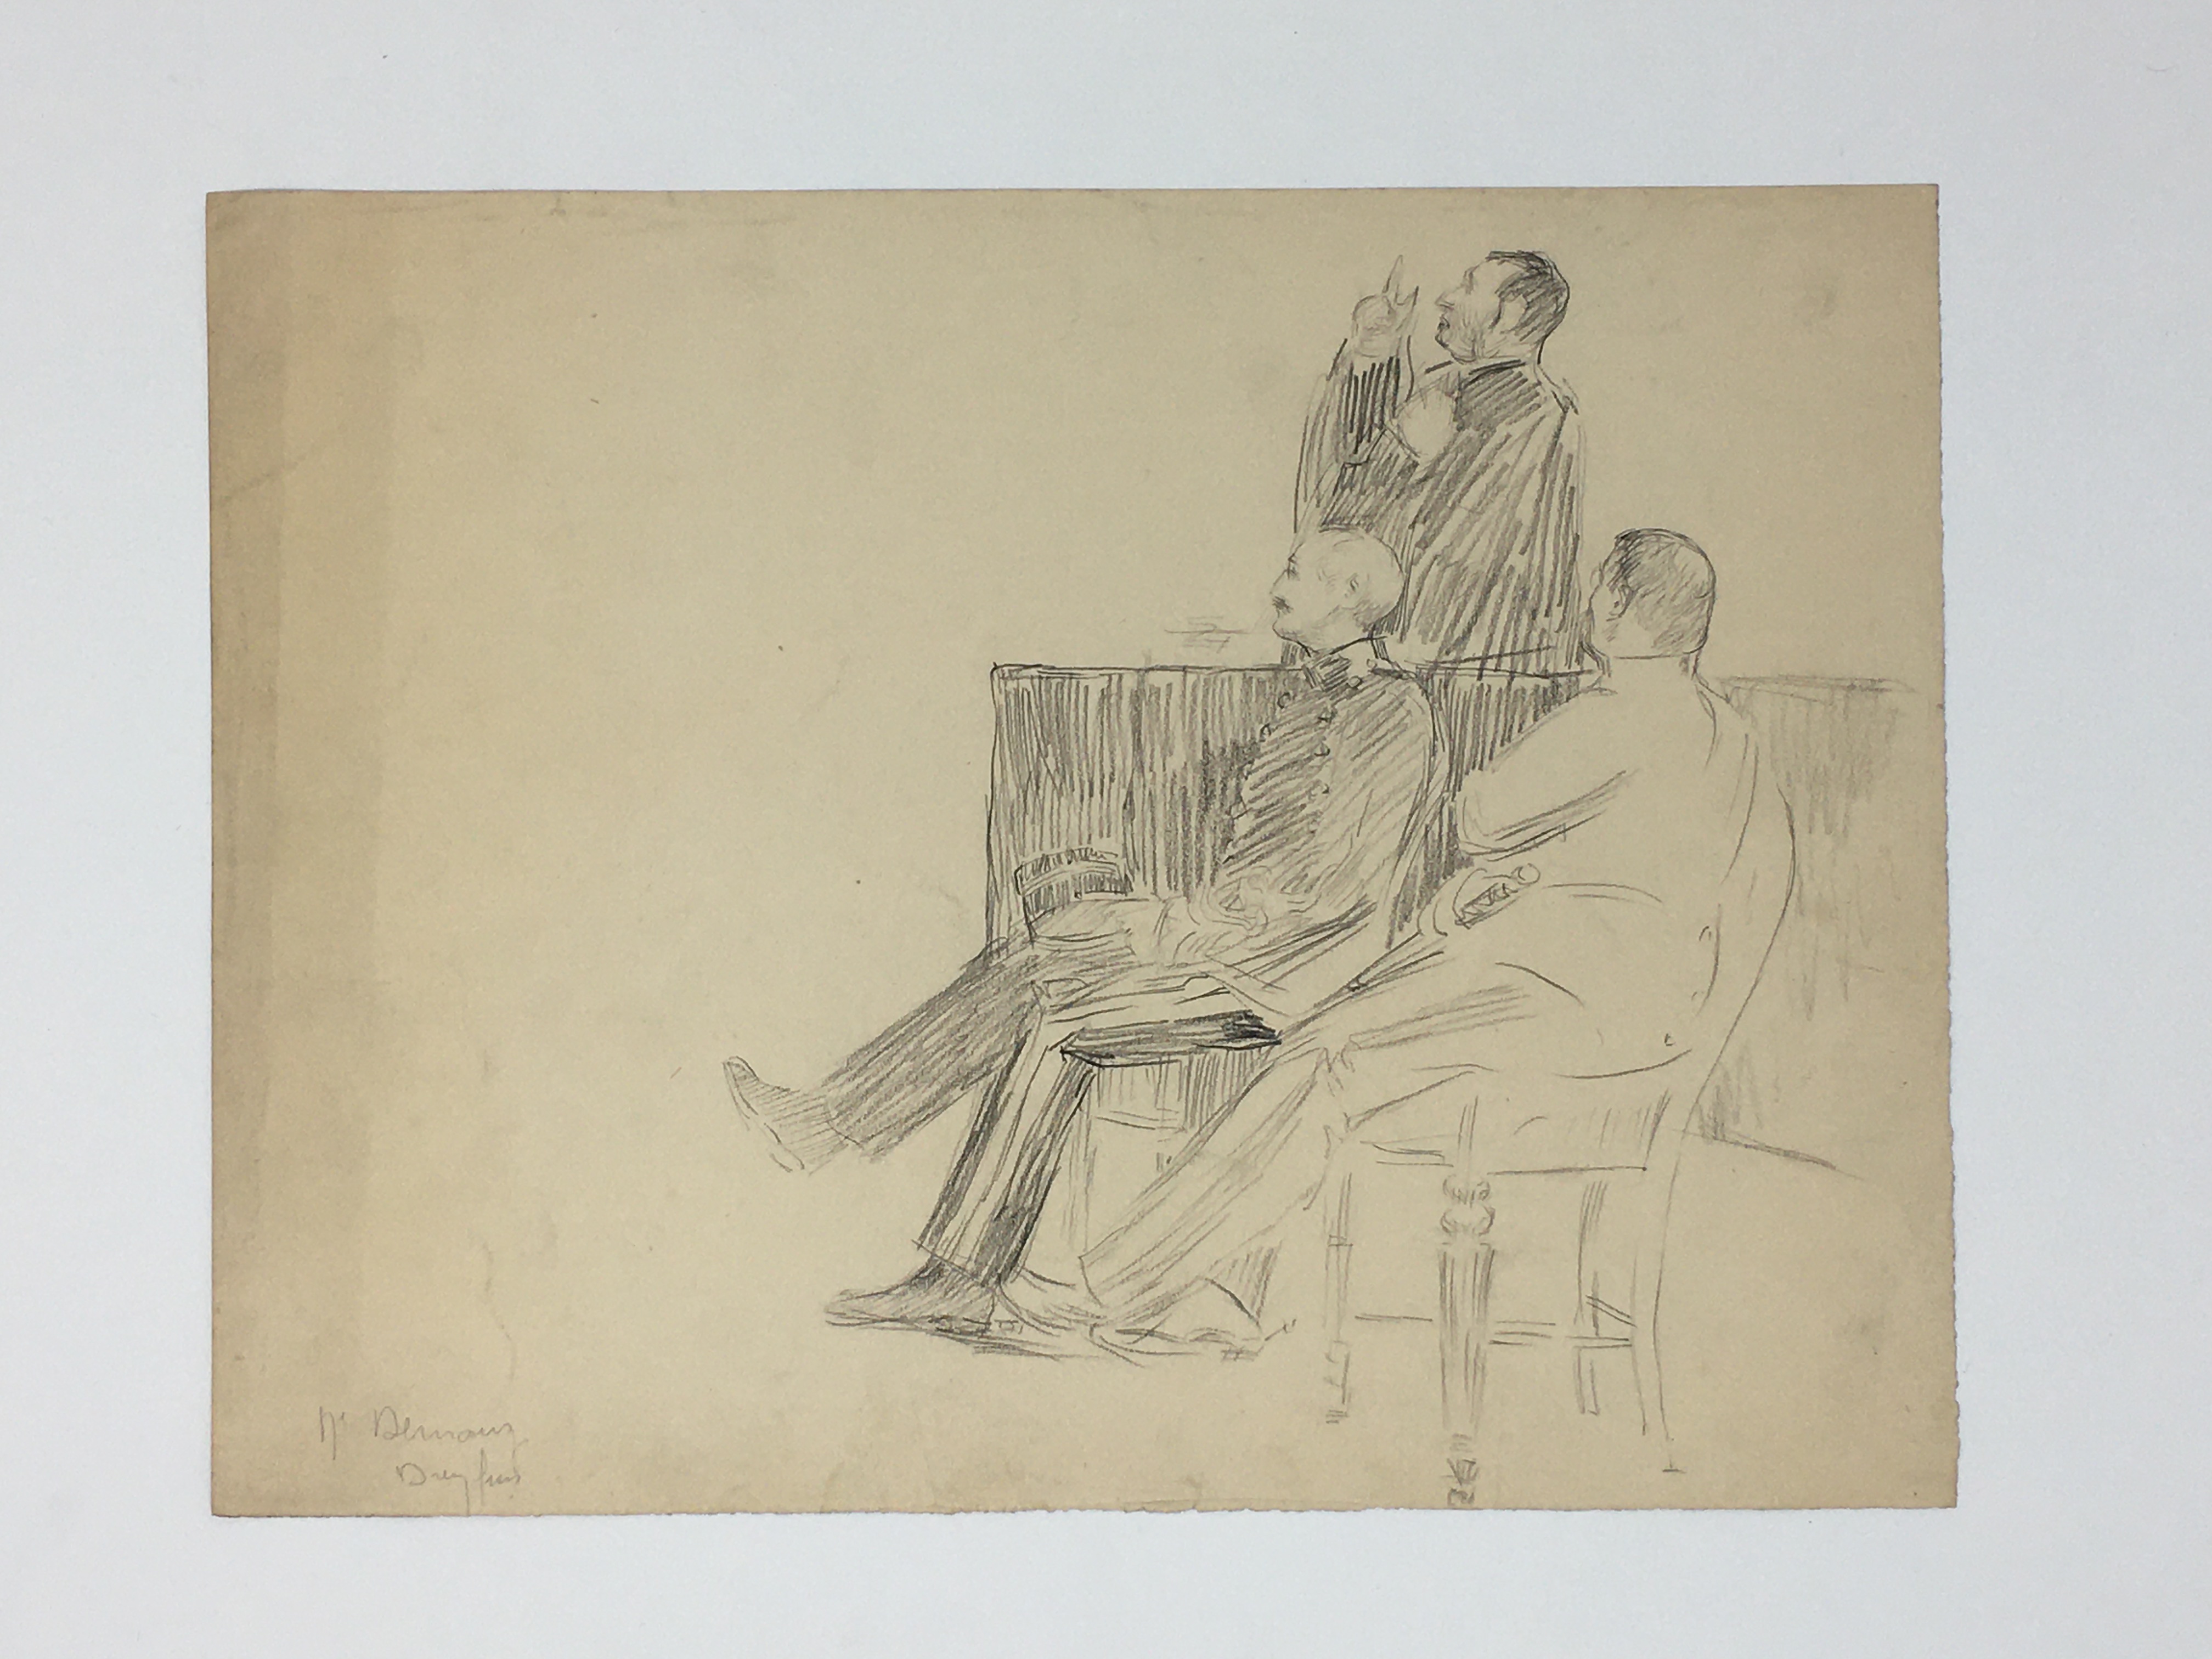 J'Accuse Newspaper, Emile Zola Quote, Signed Dreyfus Portrait, Rare Trial Drawings & Schwartzkoppen - Image 24 of 74